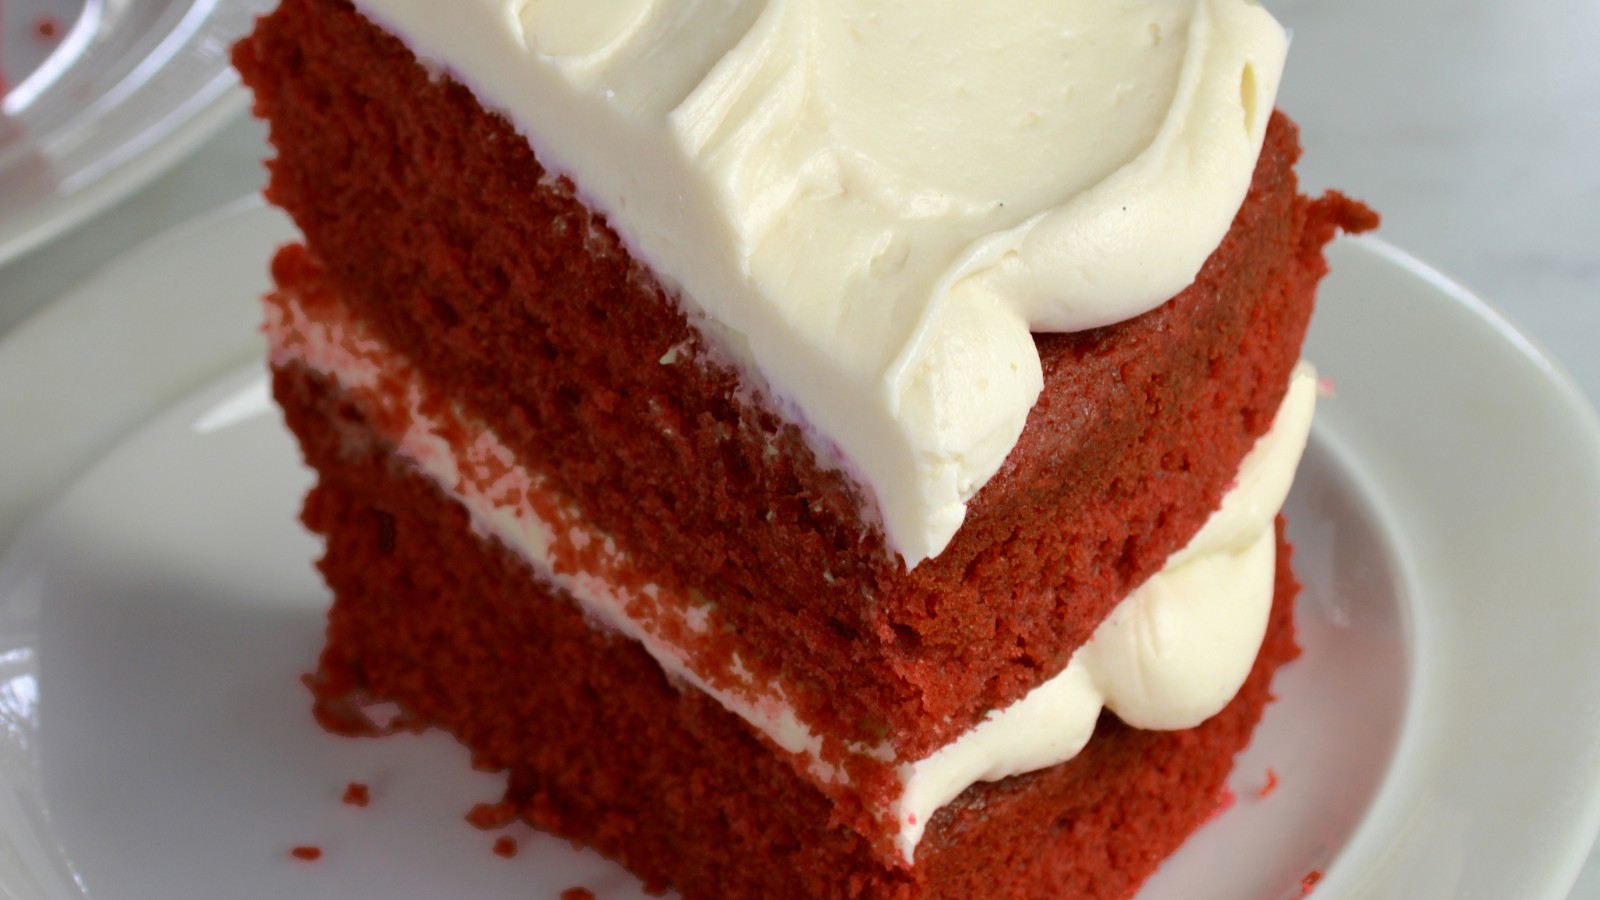 Image of Red Velvet Cake or Cupcakes with Vanilla Cake Mix